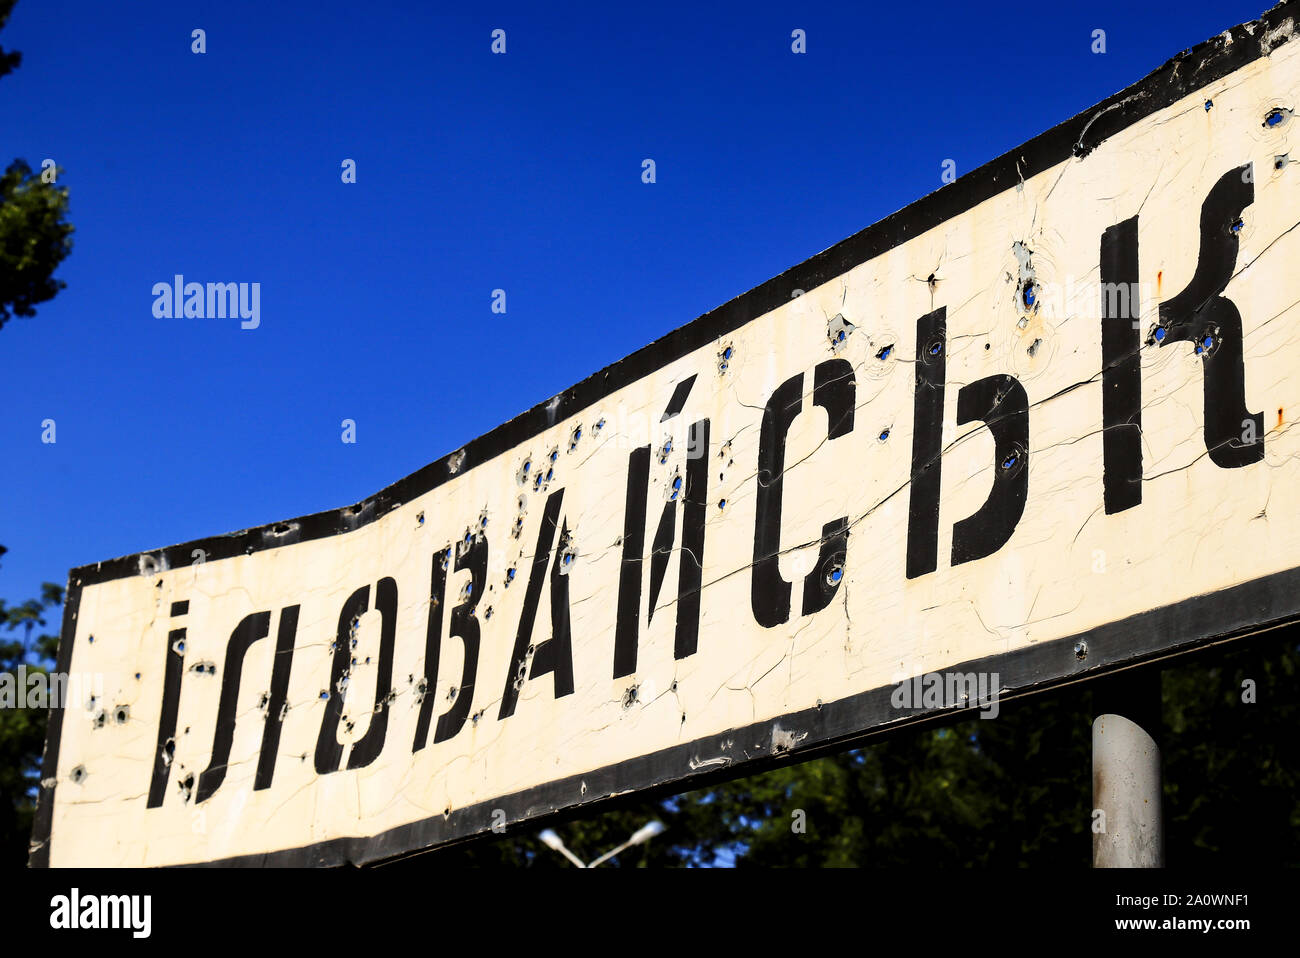 Road sign with the inscription in Ukrainian - Illowaysk, Donetsk region, broken by bullets during the war in the Donbass, Ukraine. Armed conflict Stock Photo